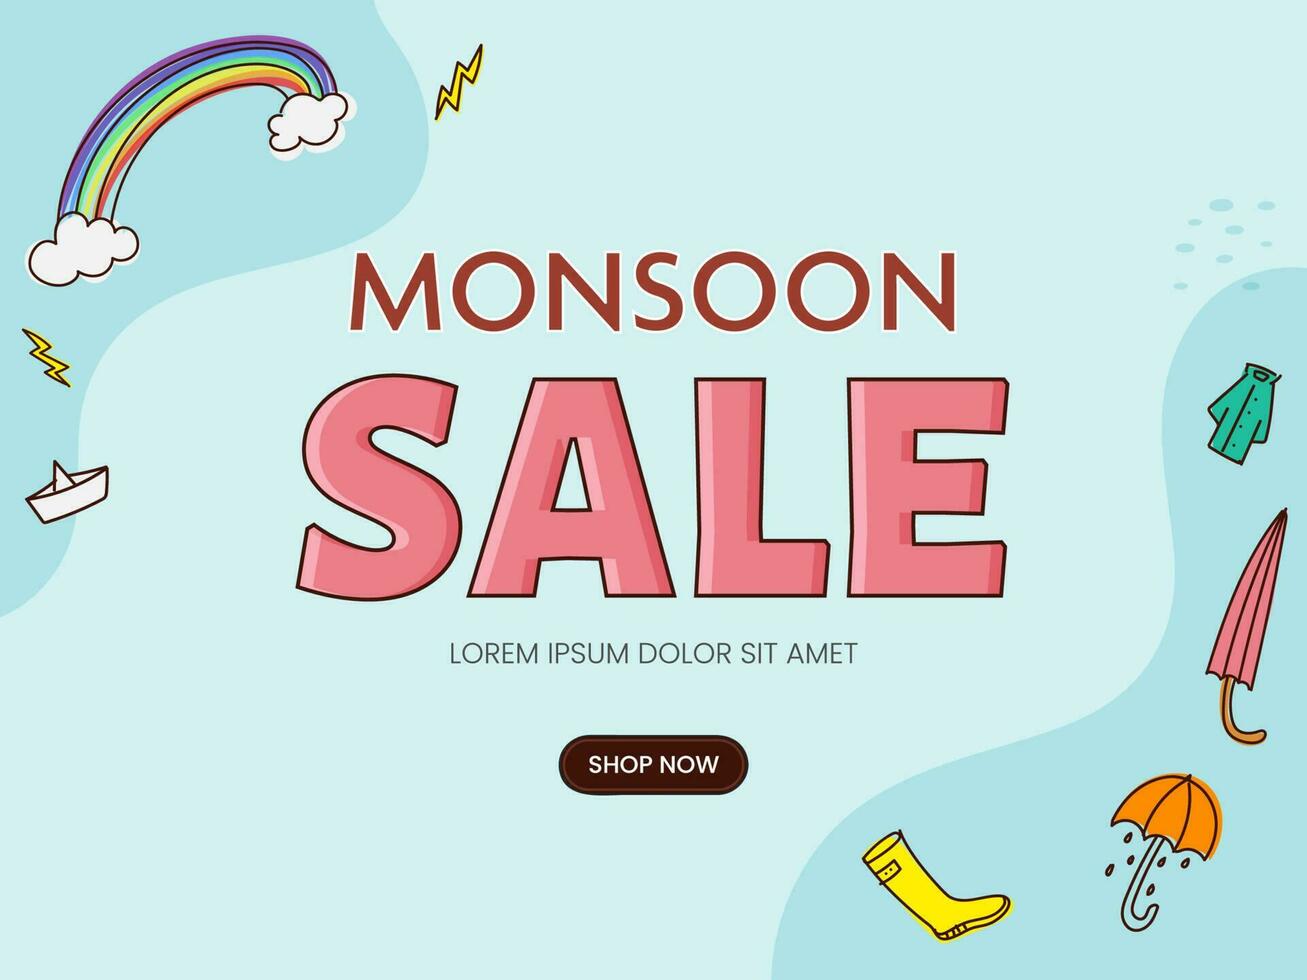 Monsoon Sale Poster Design With Doodle Umbrella, Boot, Raincoat, Rainbow, Paper Boat, Lightning Bolt On Blue Background. vector